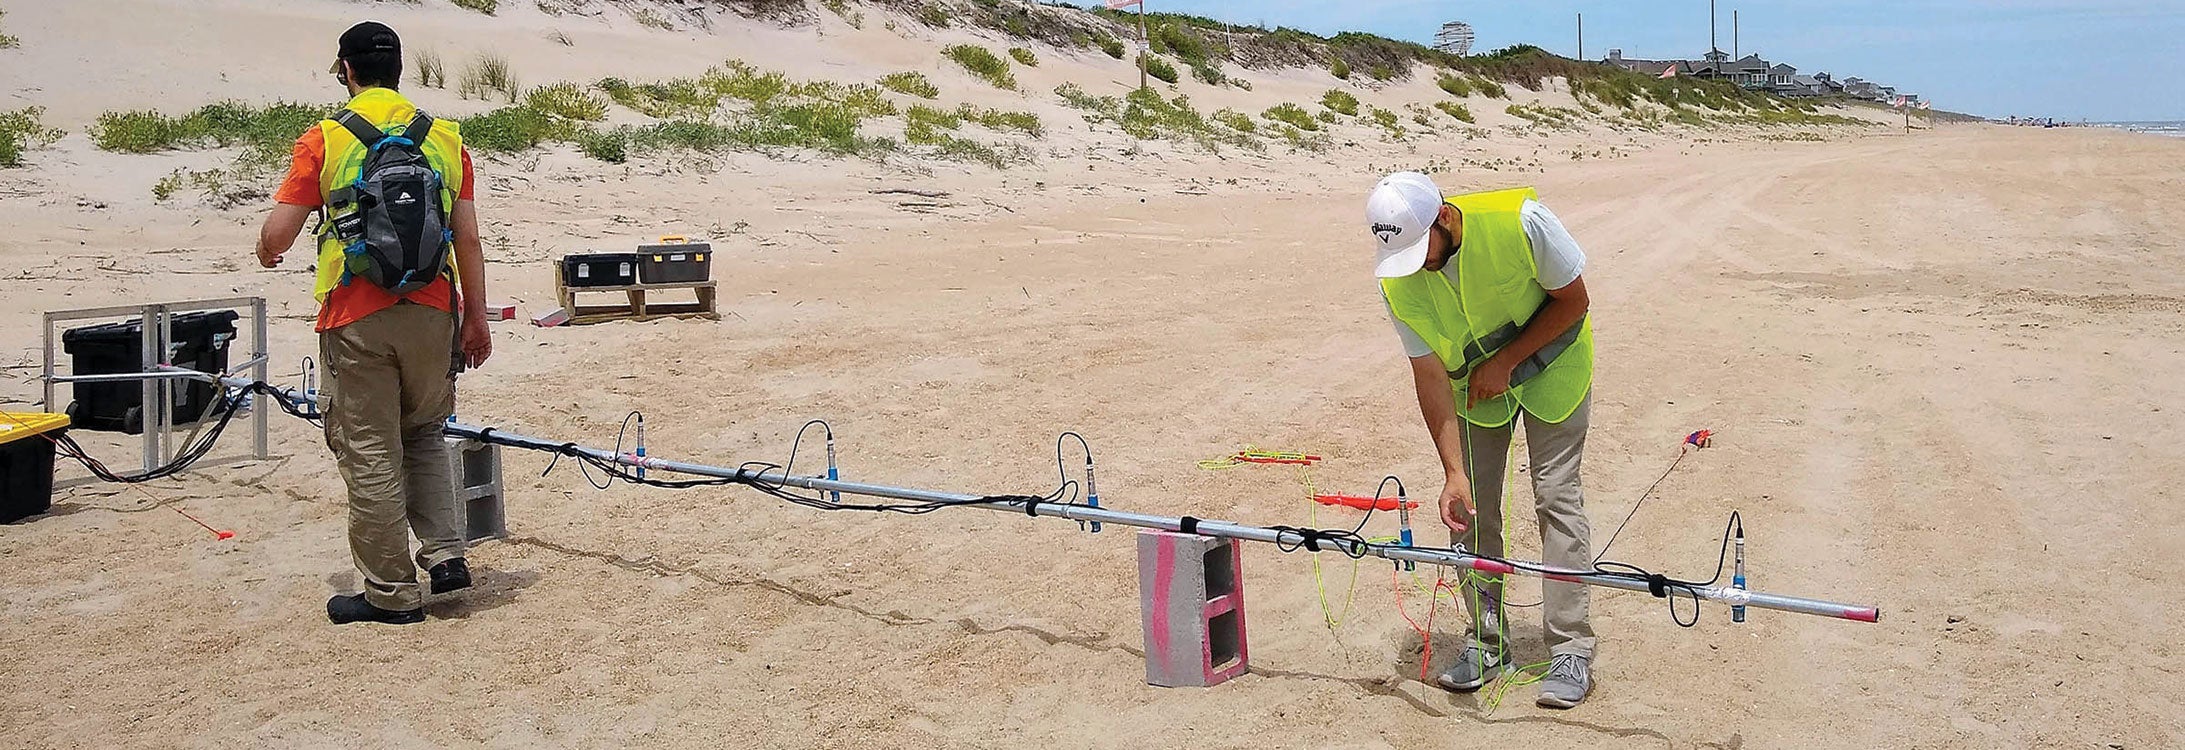 Students work on setting up
equipment as part of Teresa Ryan’s
sound propagation research in June
2019 on the Outer Banks.